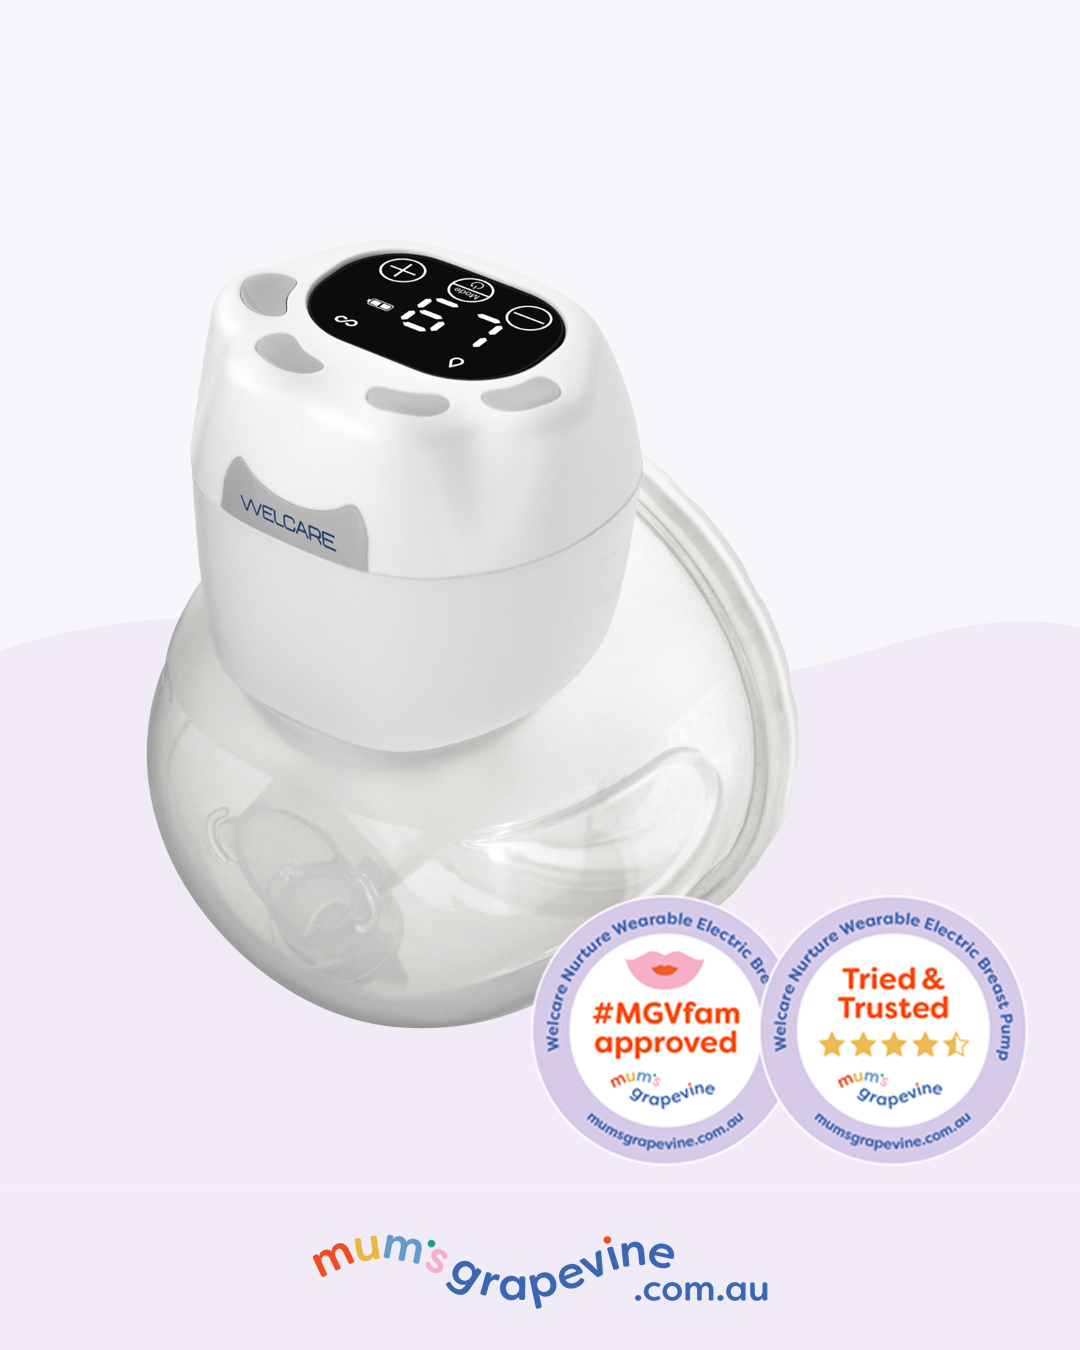 5 star review for Welcare Nurture Electric Breast Pump